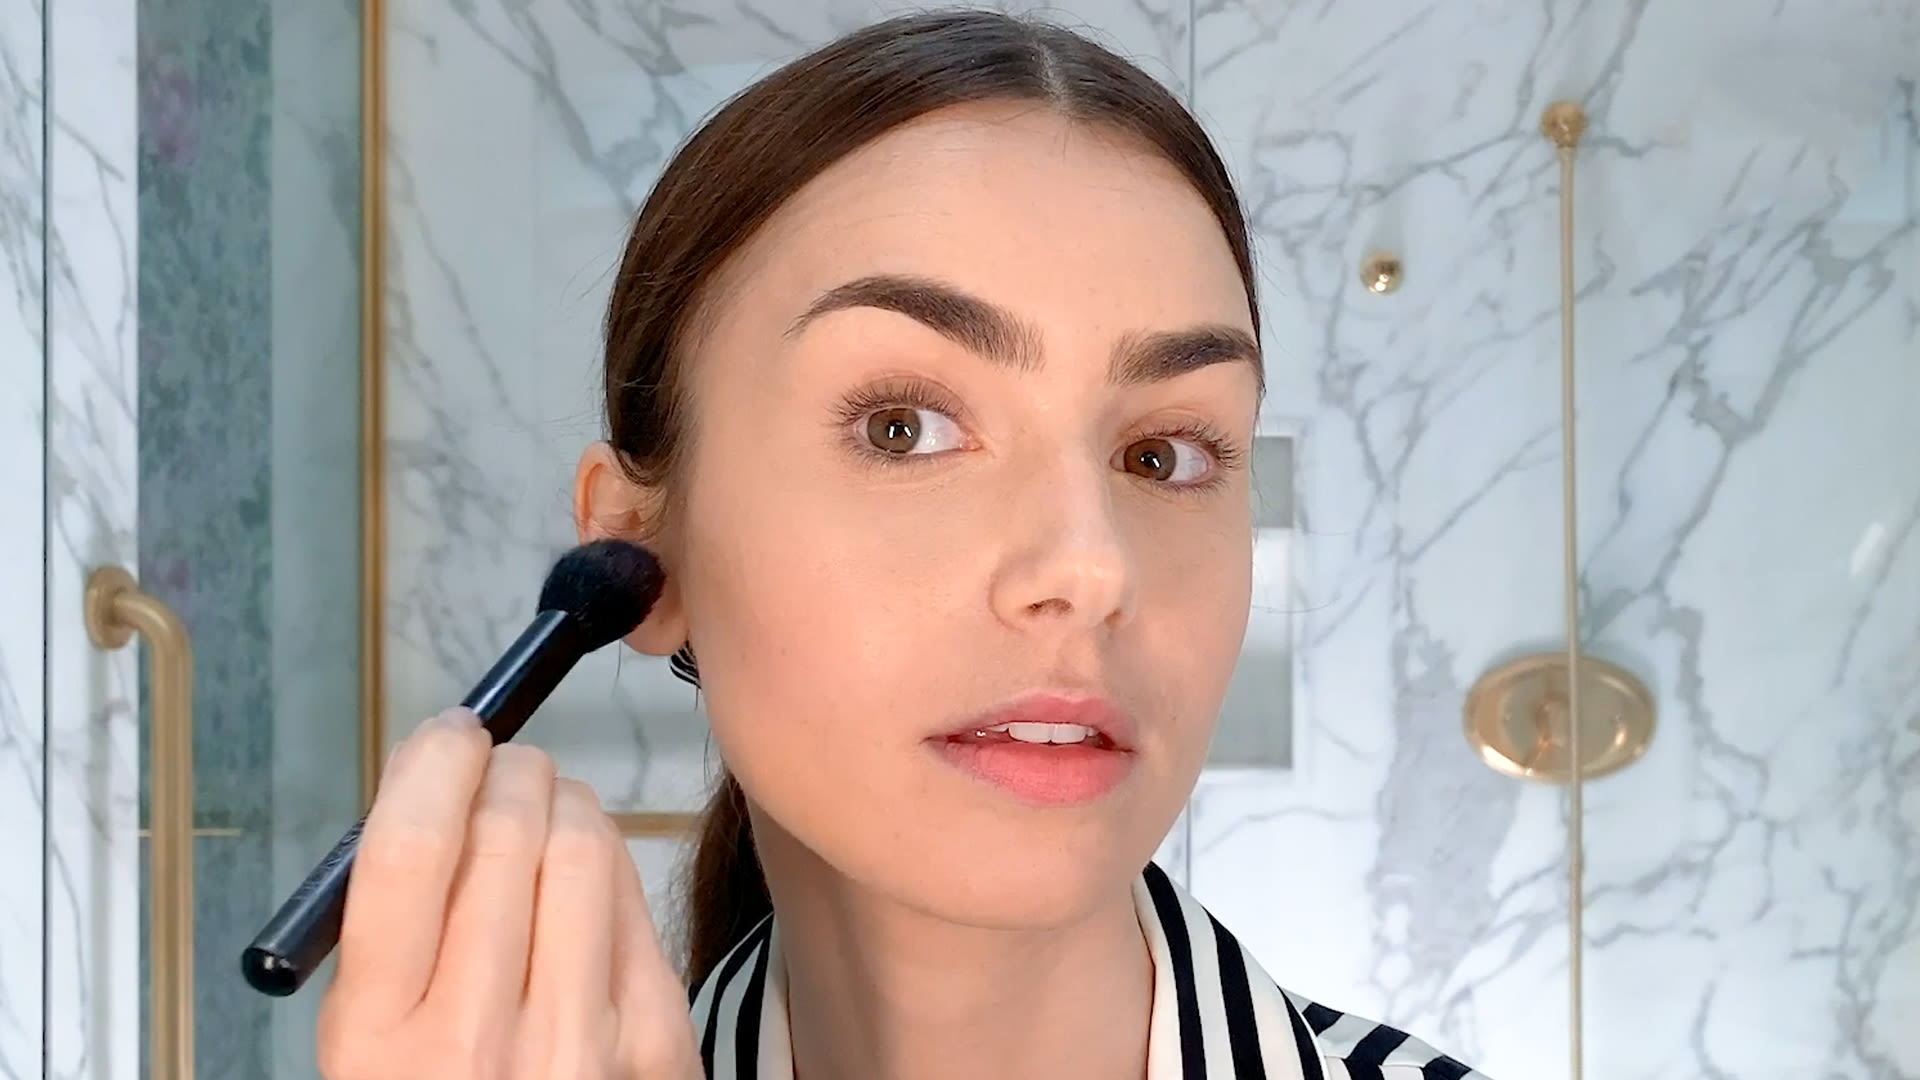 Watch Beauty Secrets Lily Collins S Understated French Girl Look Vogue Video Cne Vogue Com Vogue